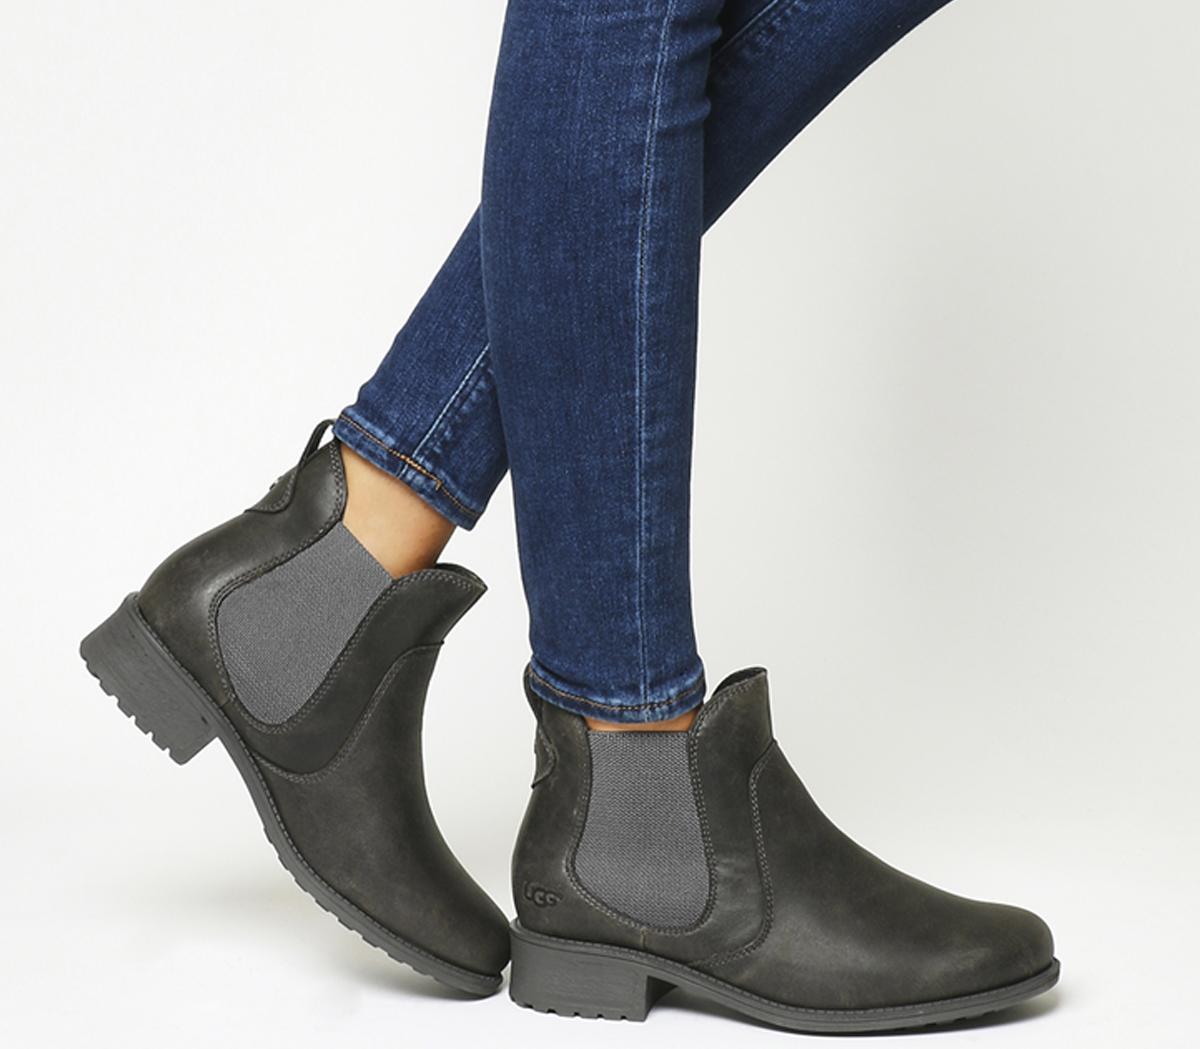 ugg leather chelsea boots